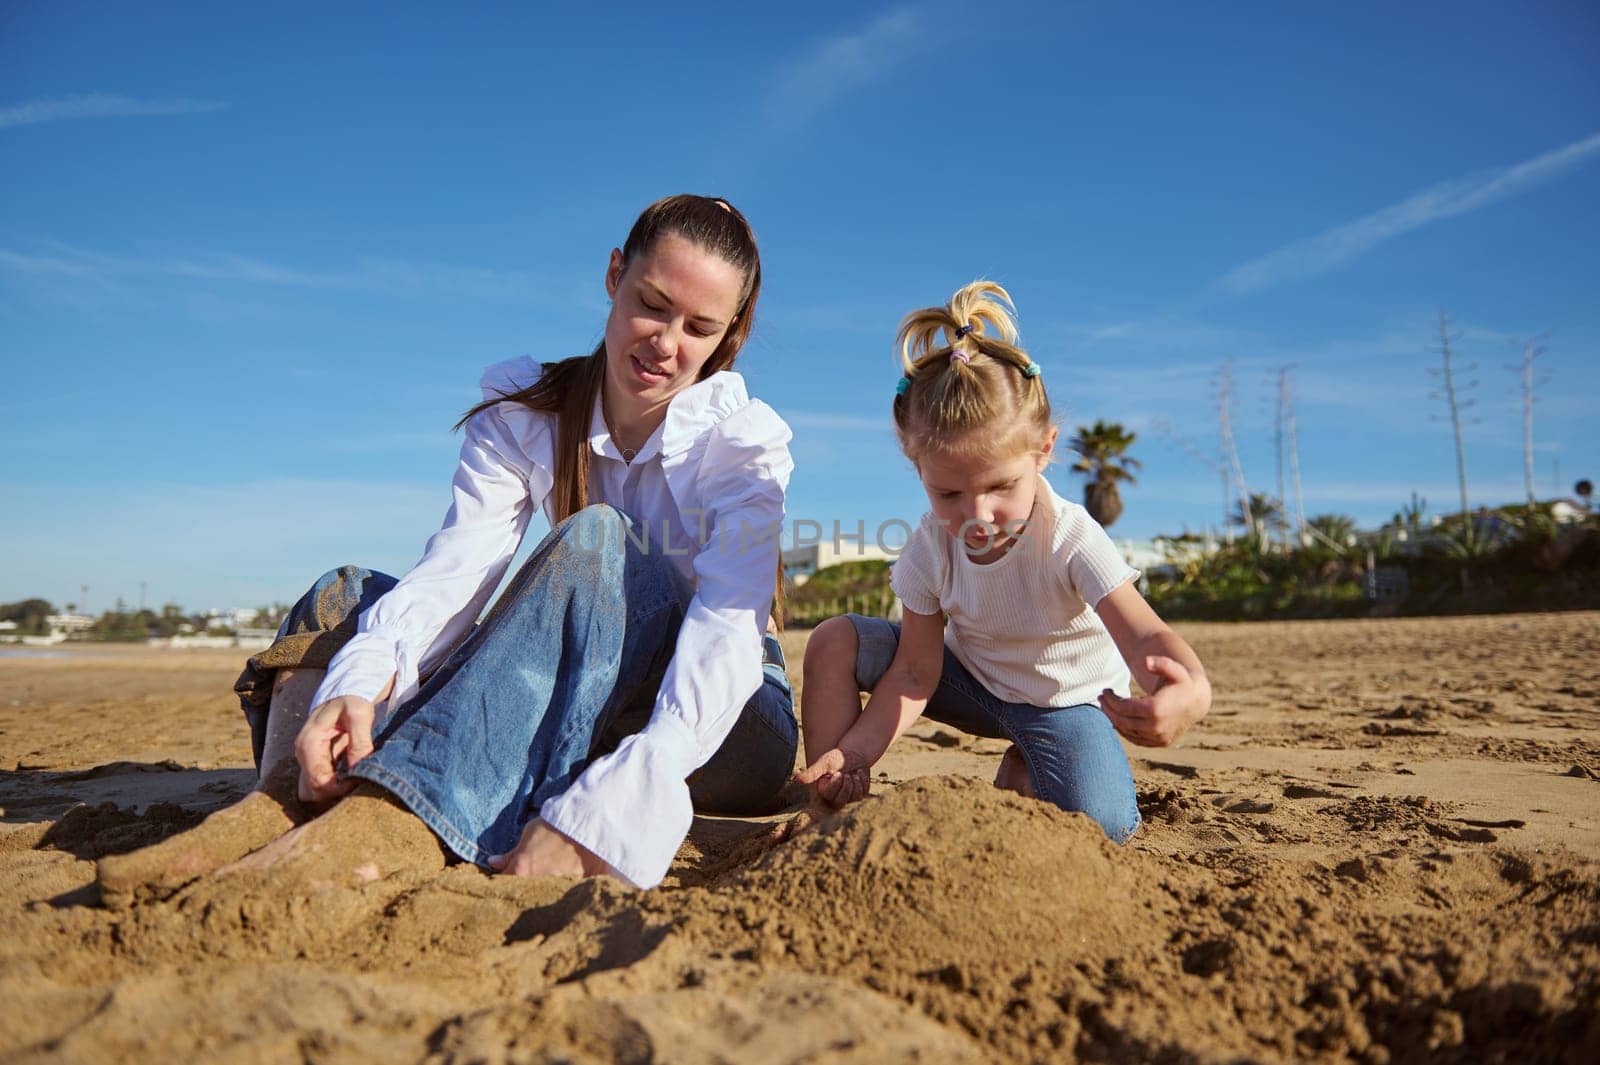 Mother and daughter playing together on the beach, building sandy castle by artgf